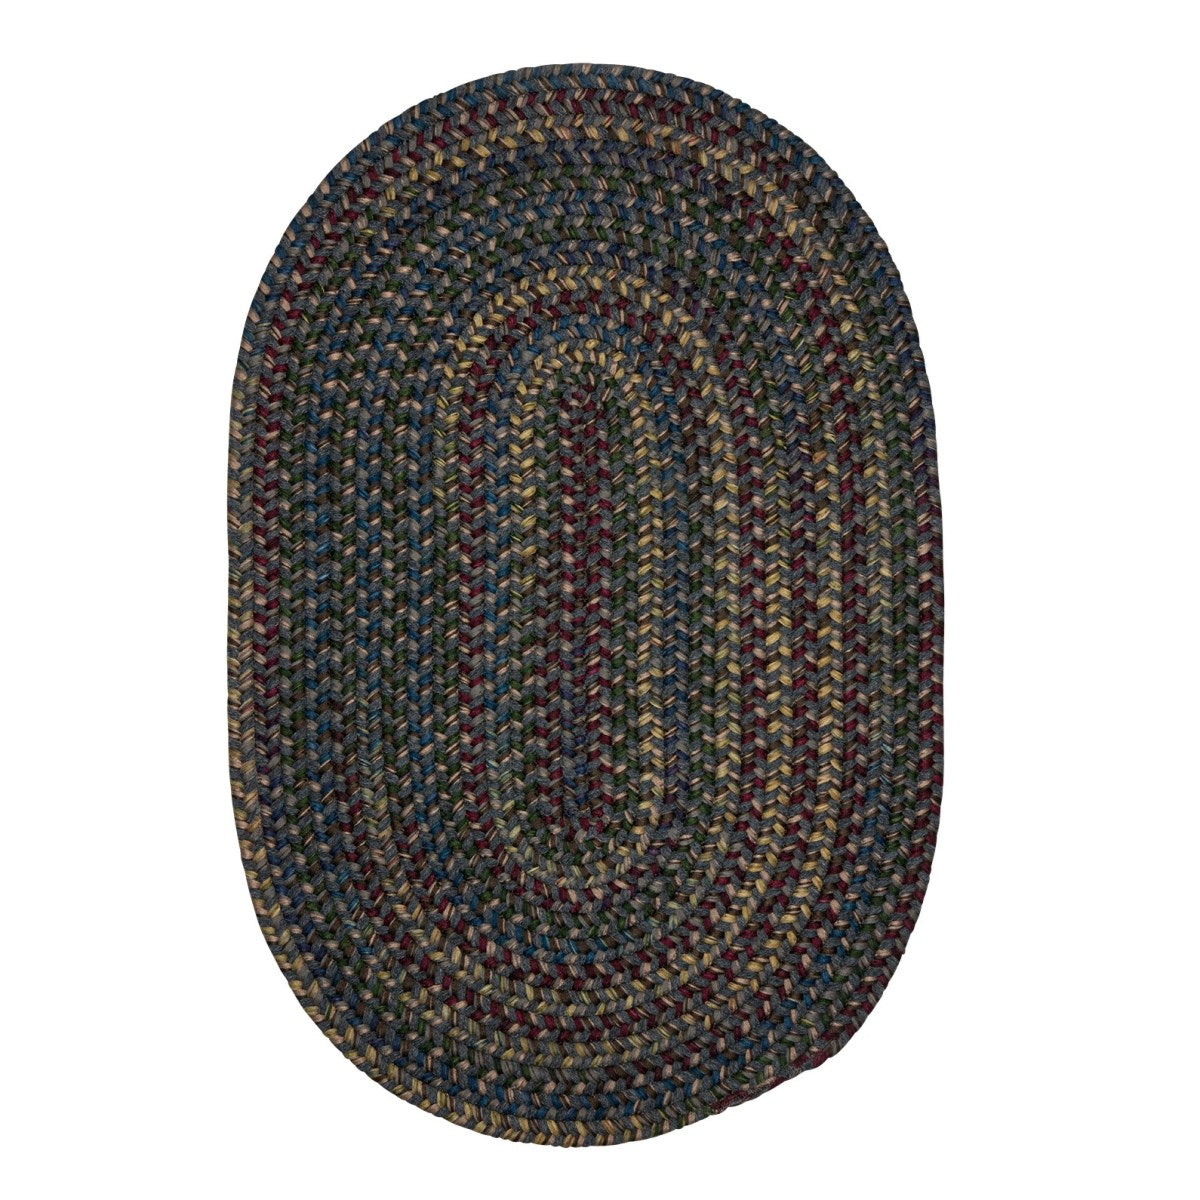 Midnight Charcoal Outdoor Braided Oval Rugs